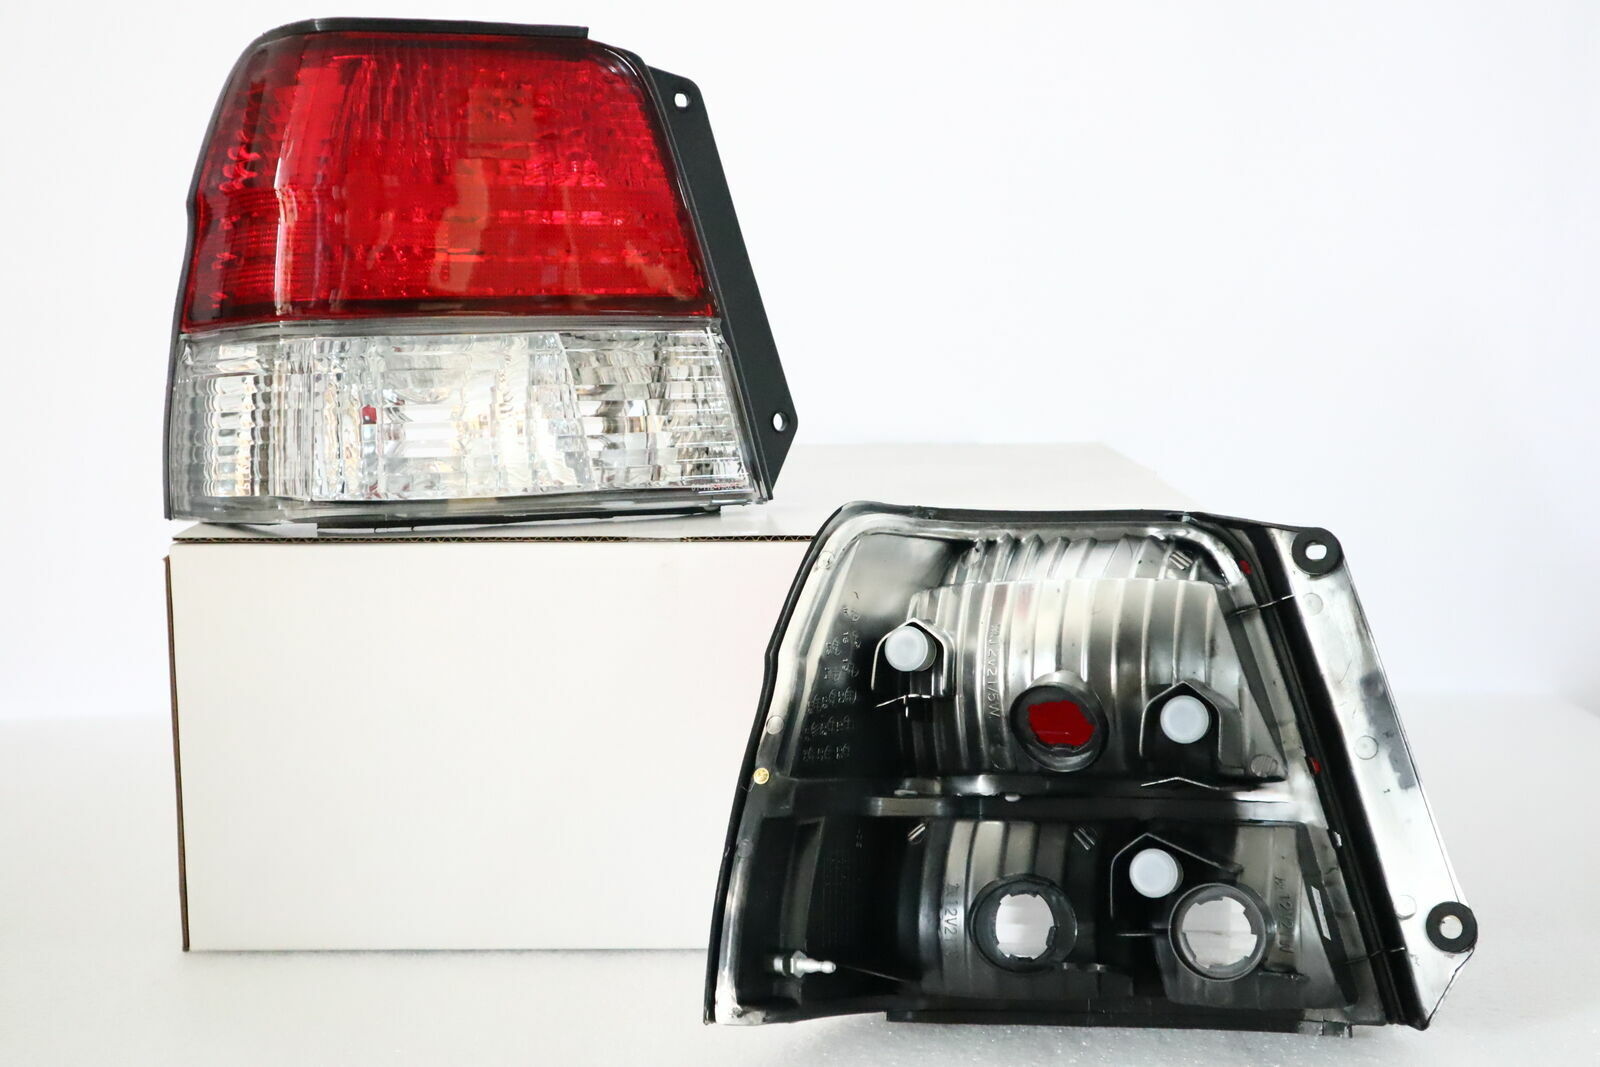 A Pair - New Tail Lamp Rear Light for Toyota Tercel 1998-1999 - Red / Clear